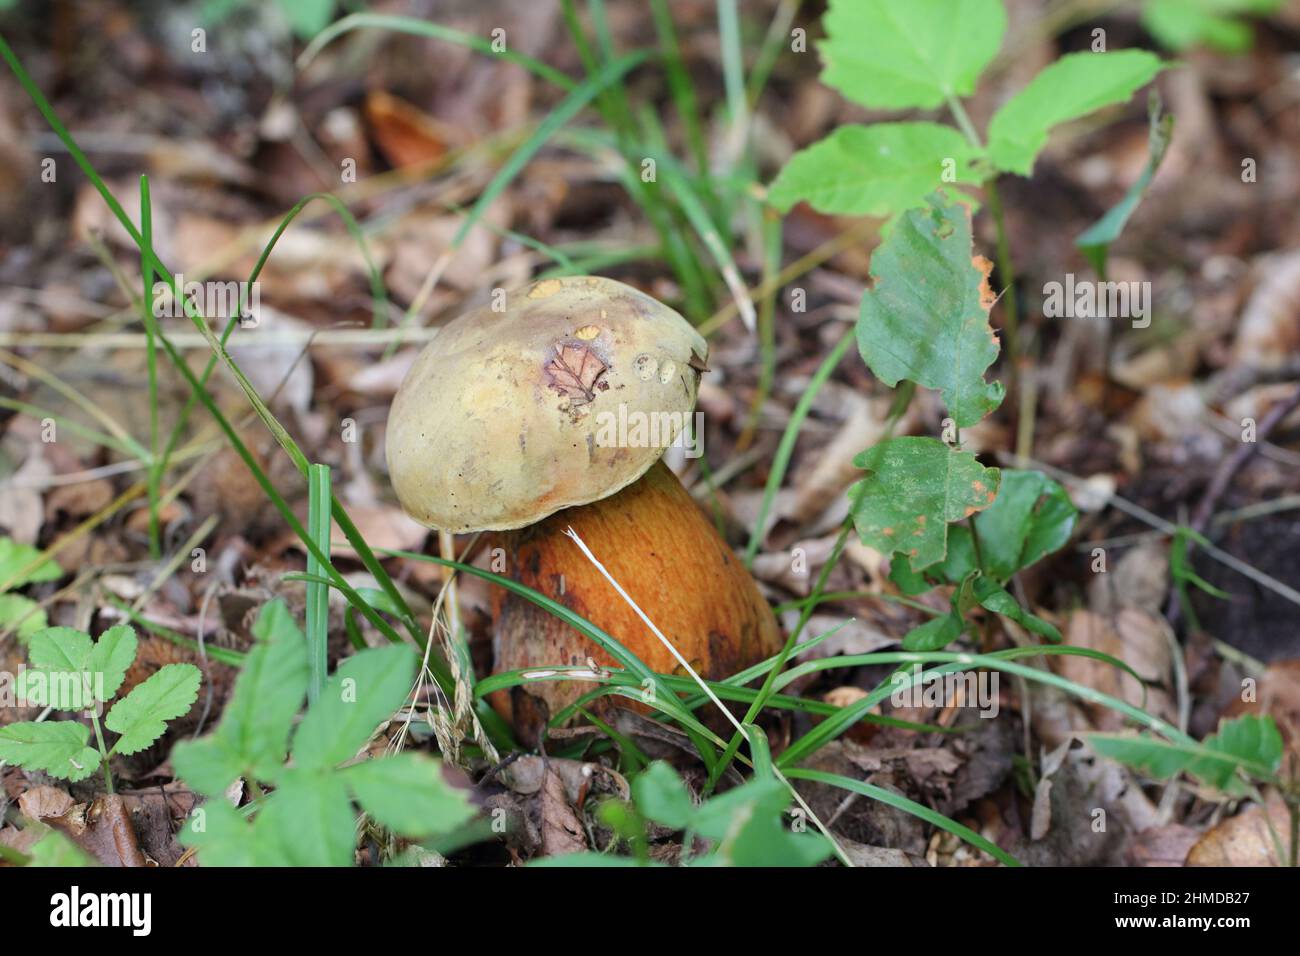 Suillellus luridus (formerly Boletus luridus), commonly known as the lurid bolete with forest trees in the background Stock Photo